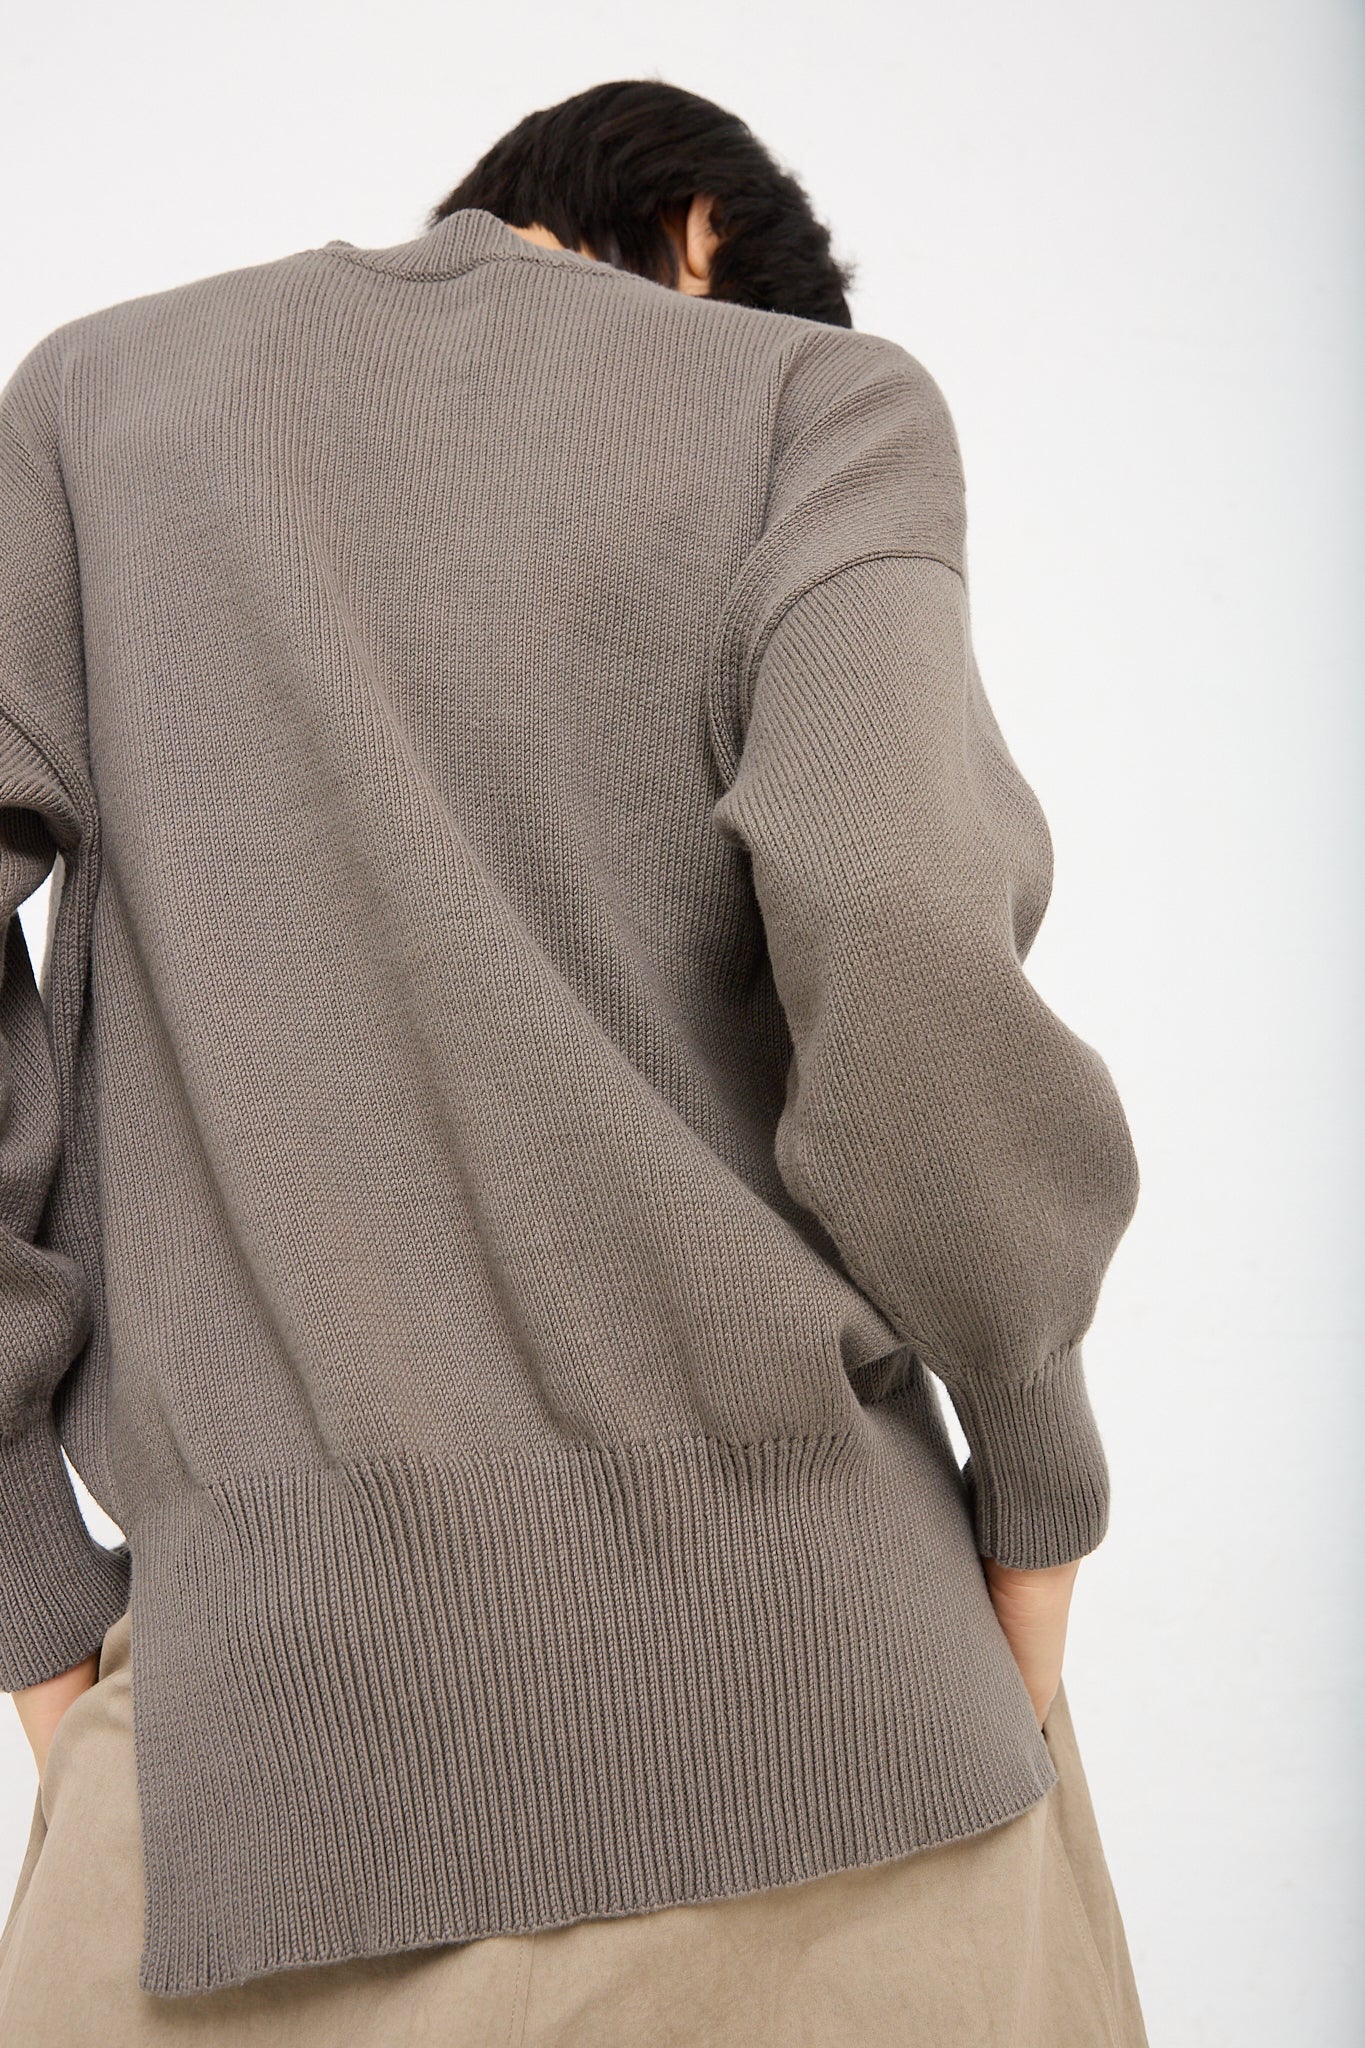 The back of a woman wearing a Lauren Manoogian Simple Crewneck in Rock (Olive Brown), made from pima cotton and paired with khaki pants.